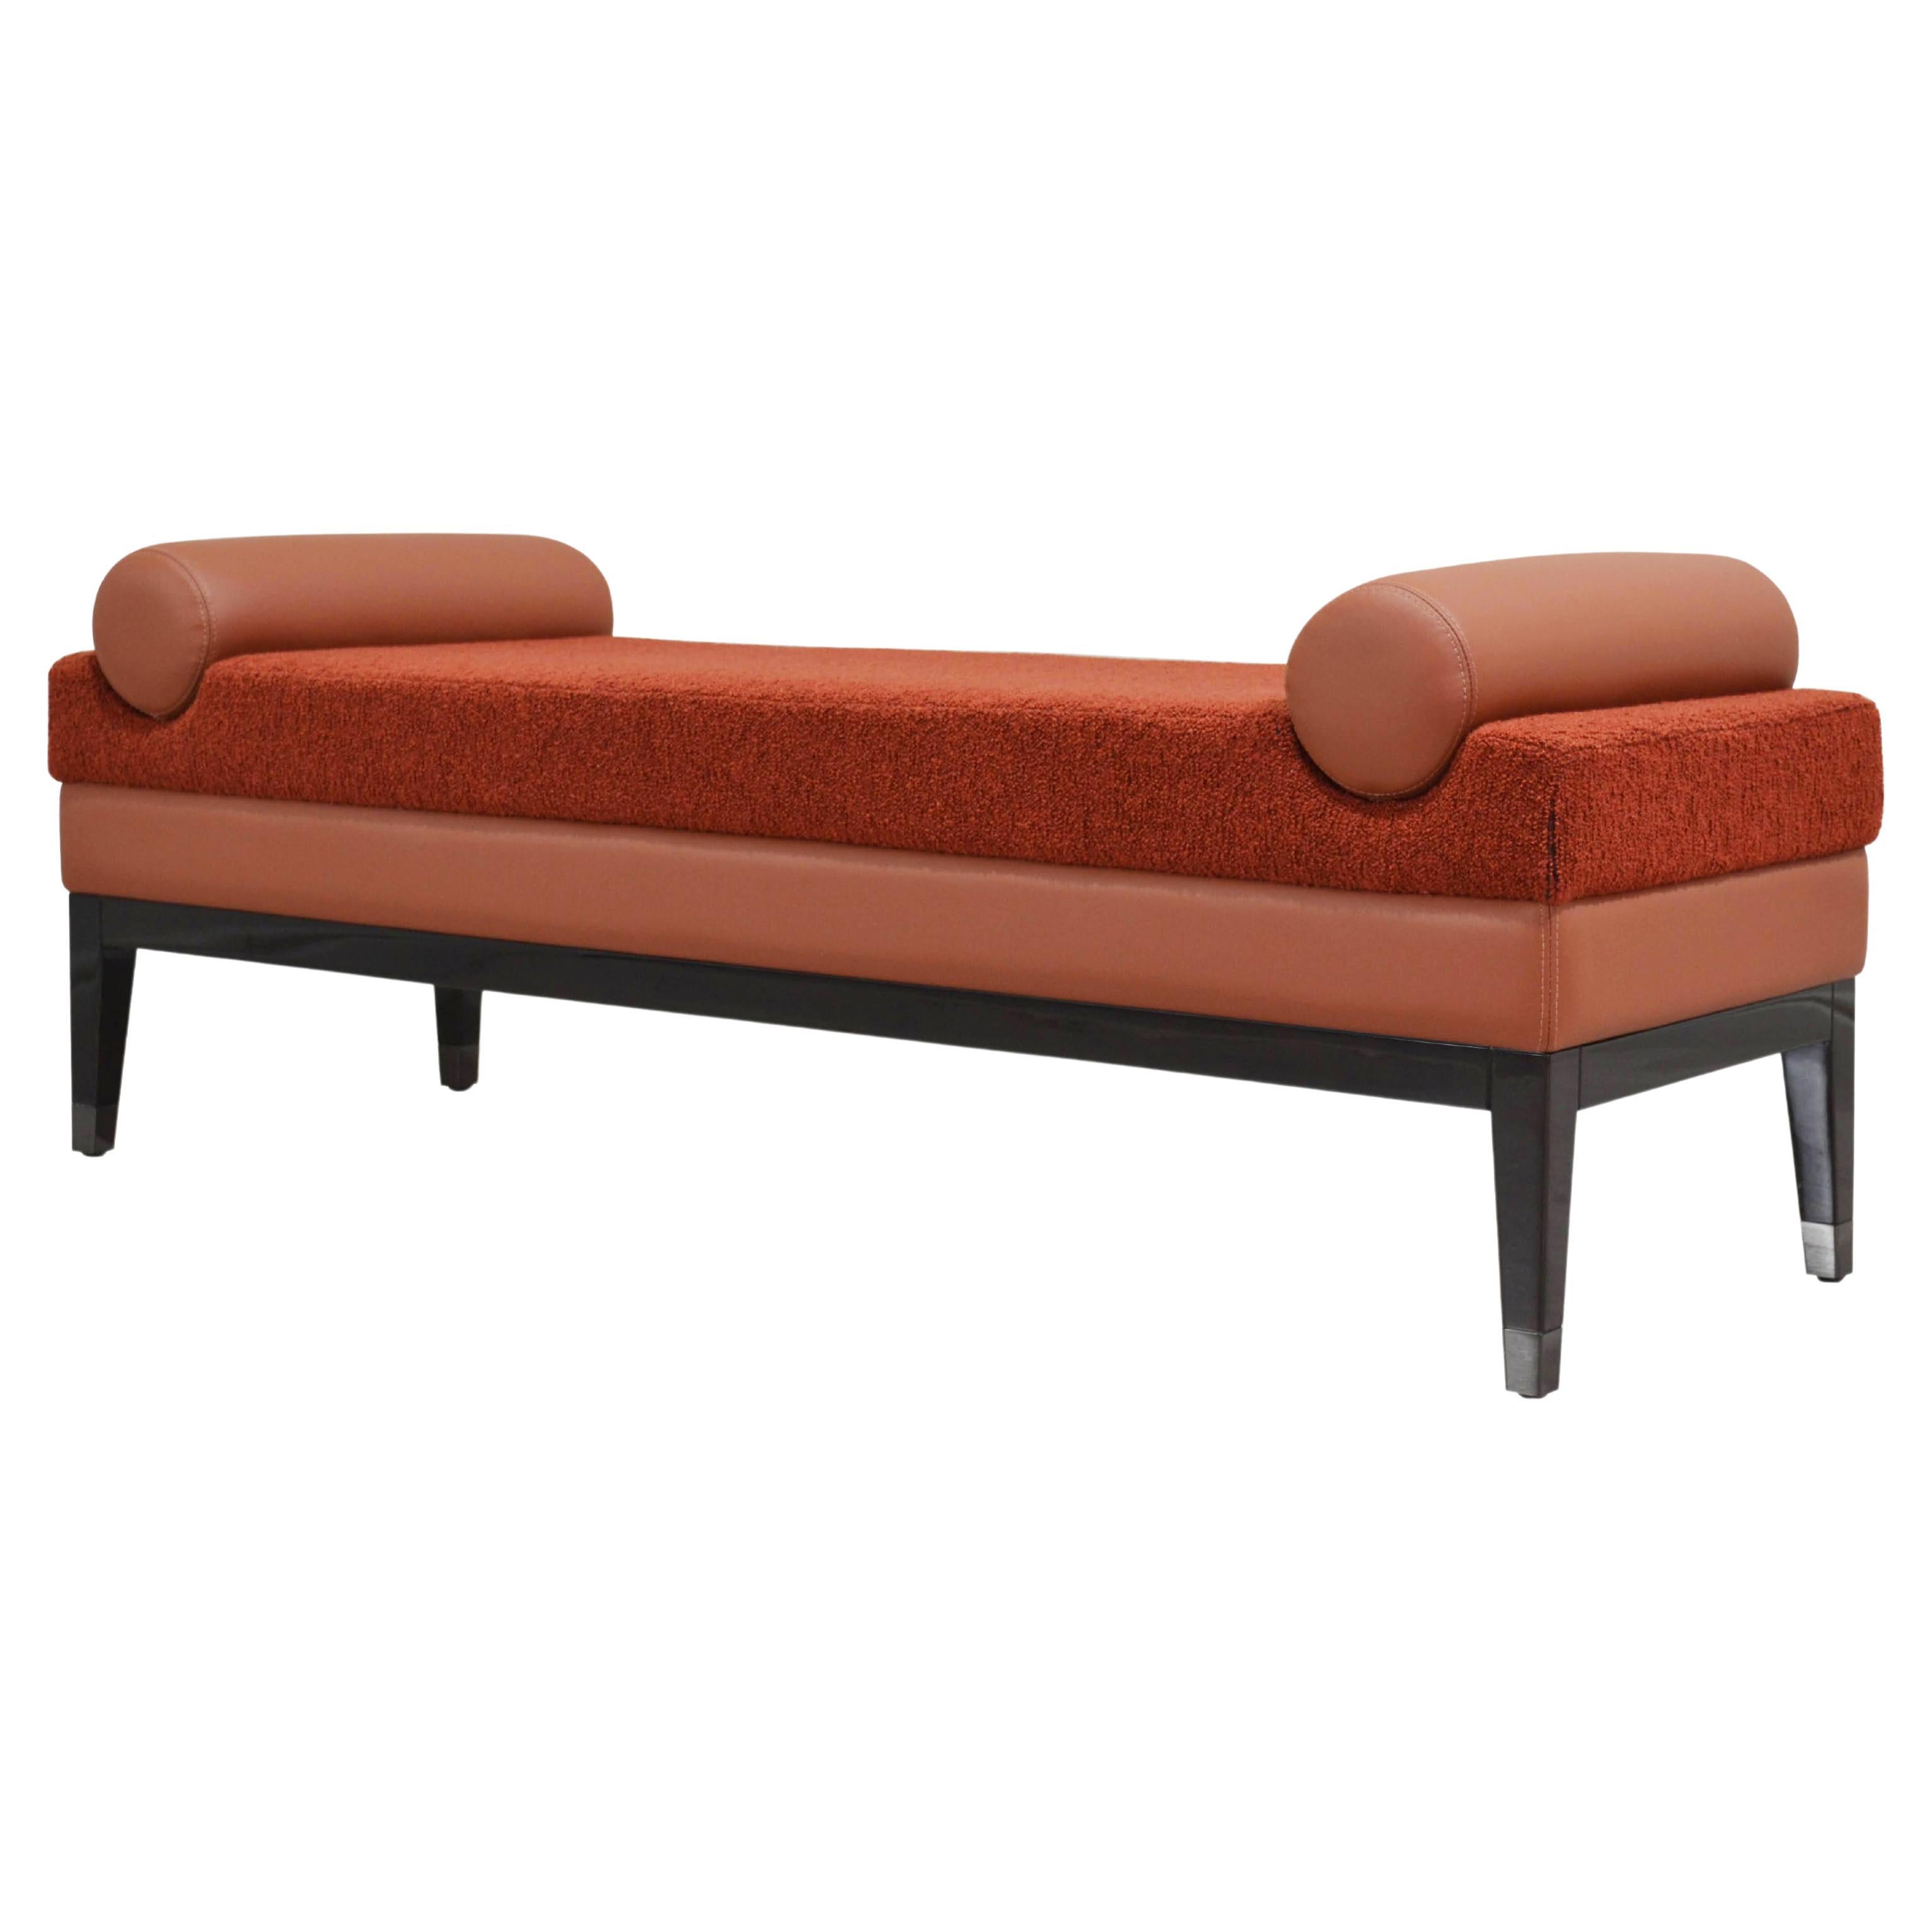 Italian Contemporary Upholstered Bench in Terracotta Fabric and Red Leather